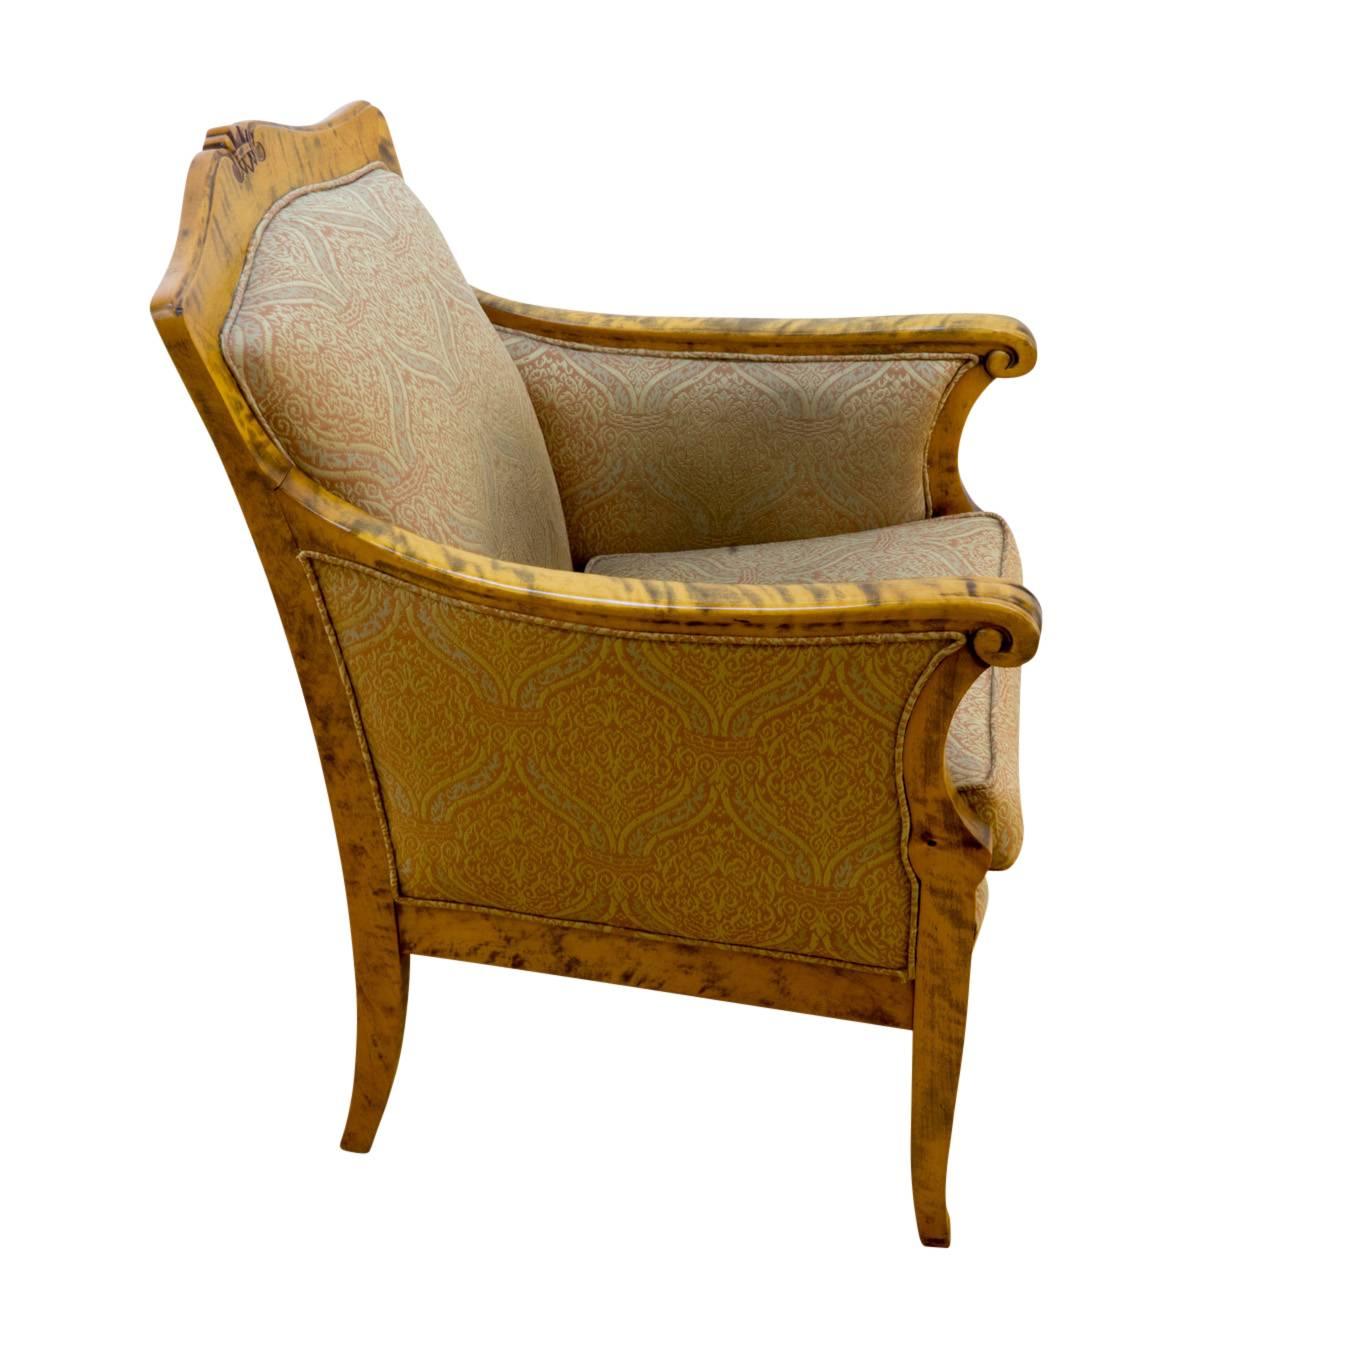 Designed for a graceful 19th century sitting room, this chair is constructed of solid highly figured birch, and reupholstered in a period appropriate, but modern fabric. The addition of a seat cushion at the time of reupholster, adds seat height as